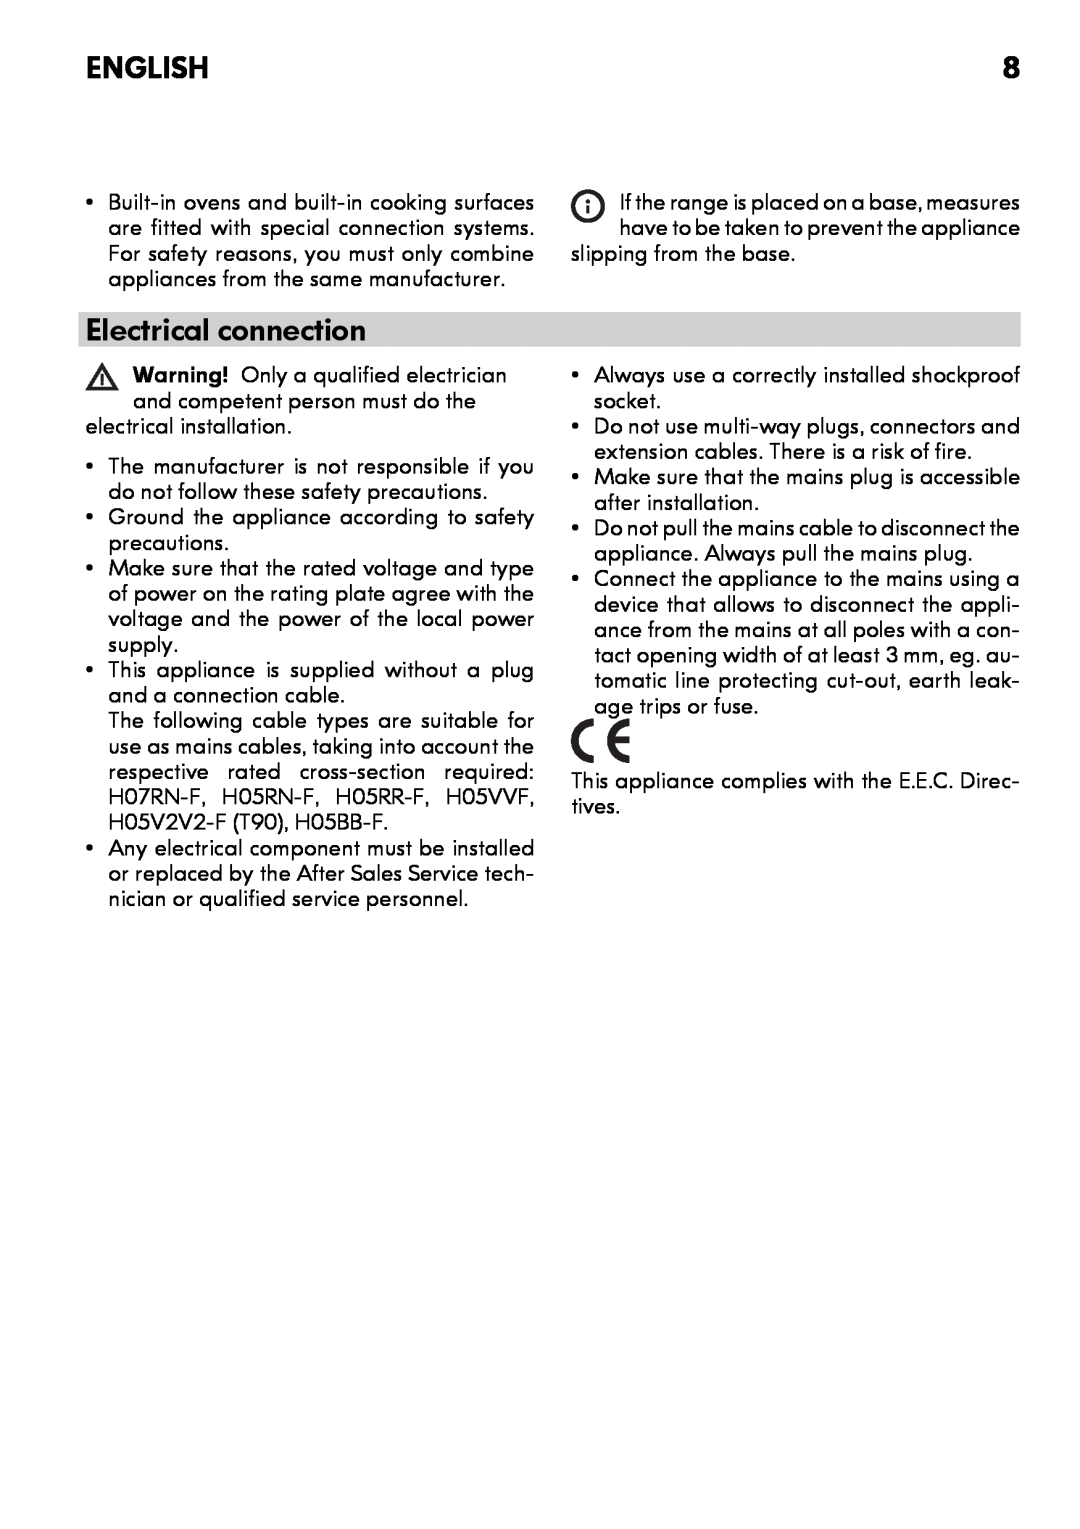 IKEA CG3 manual Electrical connection, English, Warning! Only a qualified electrician 